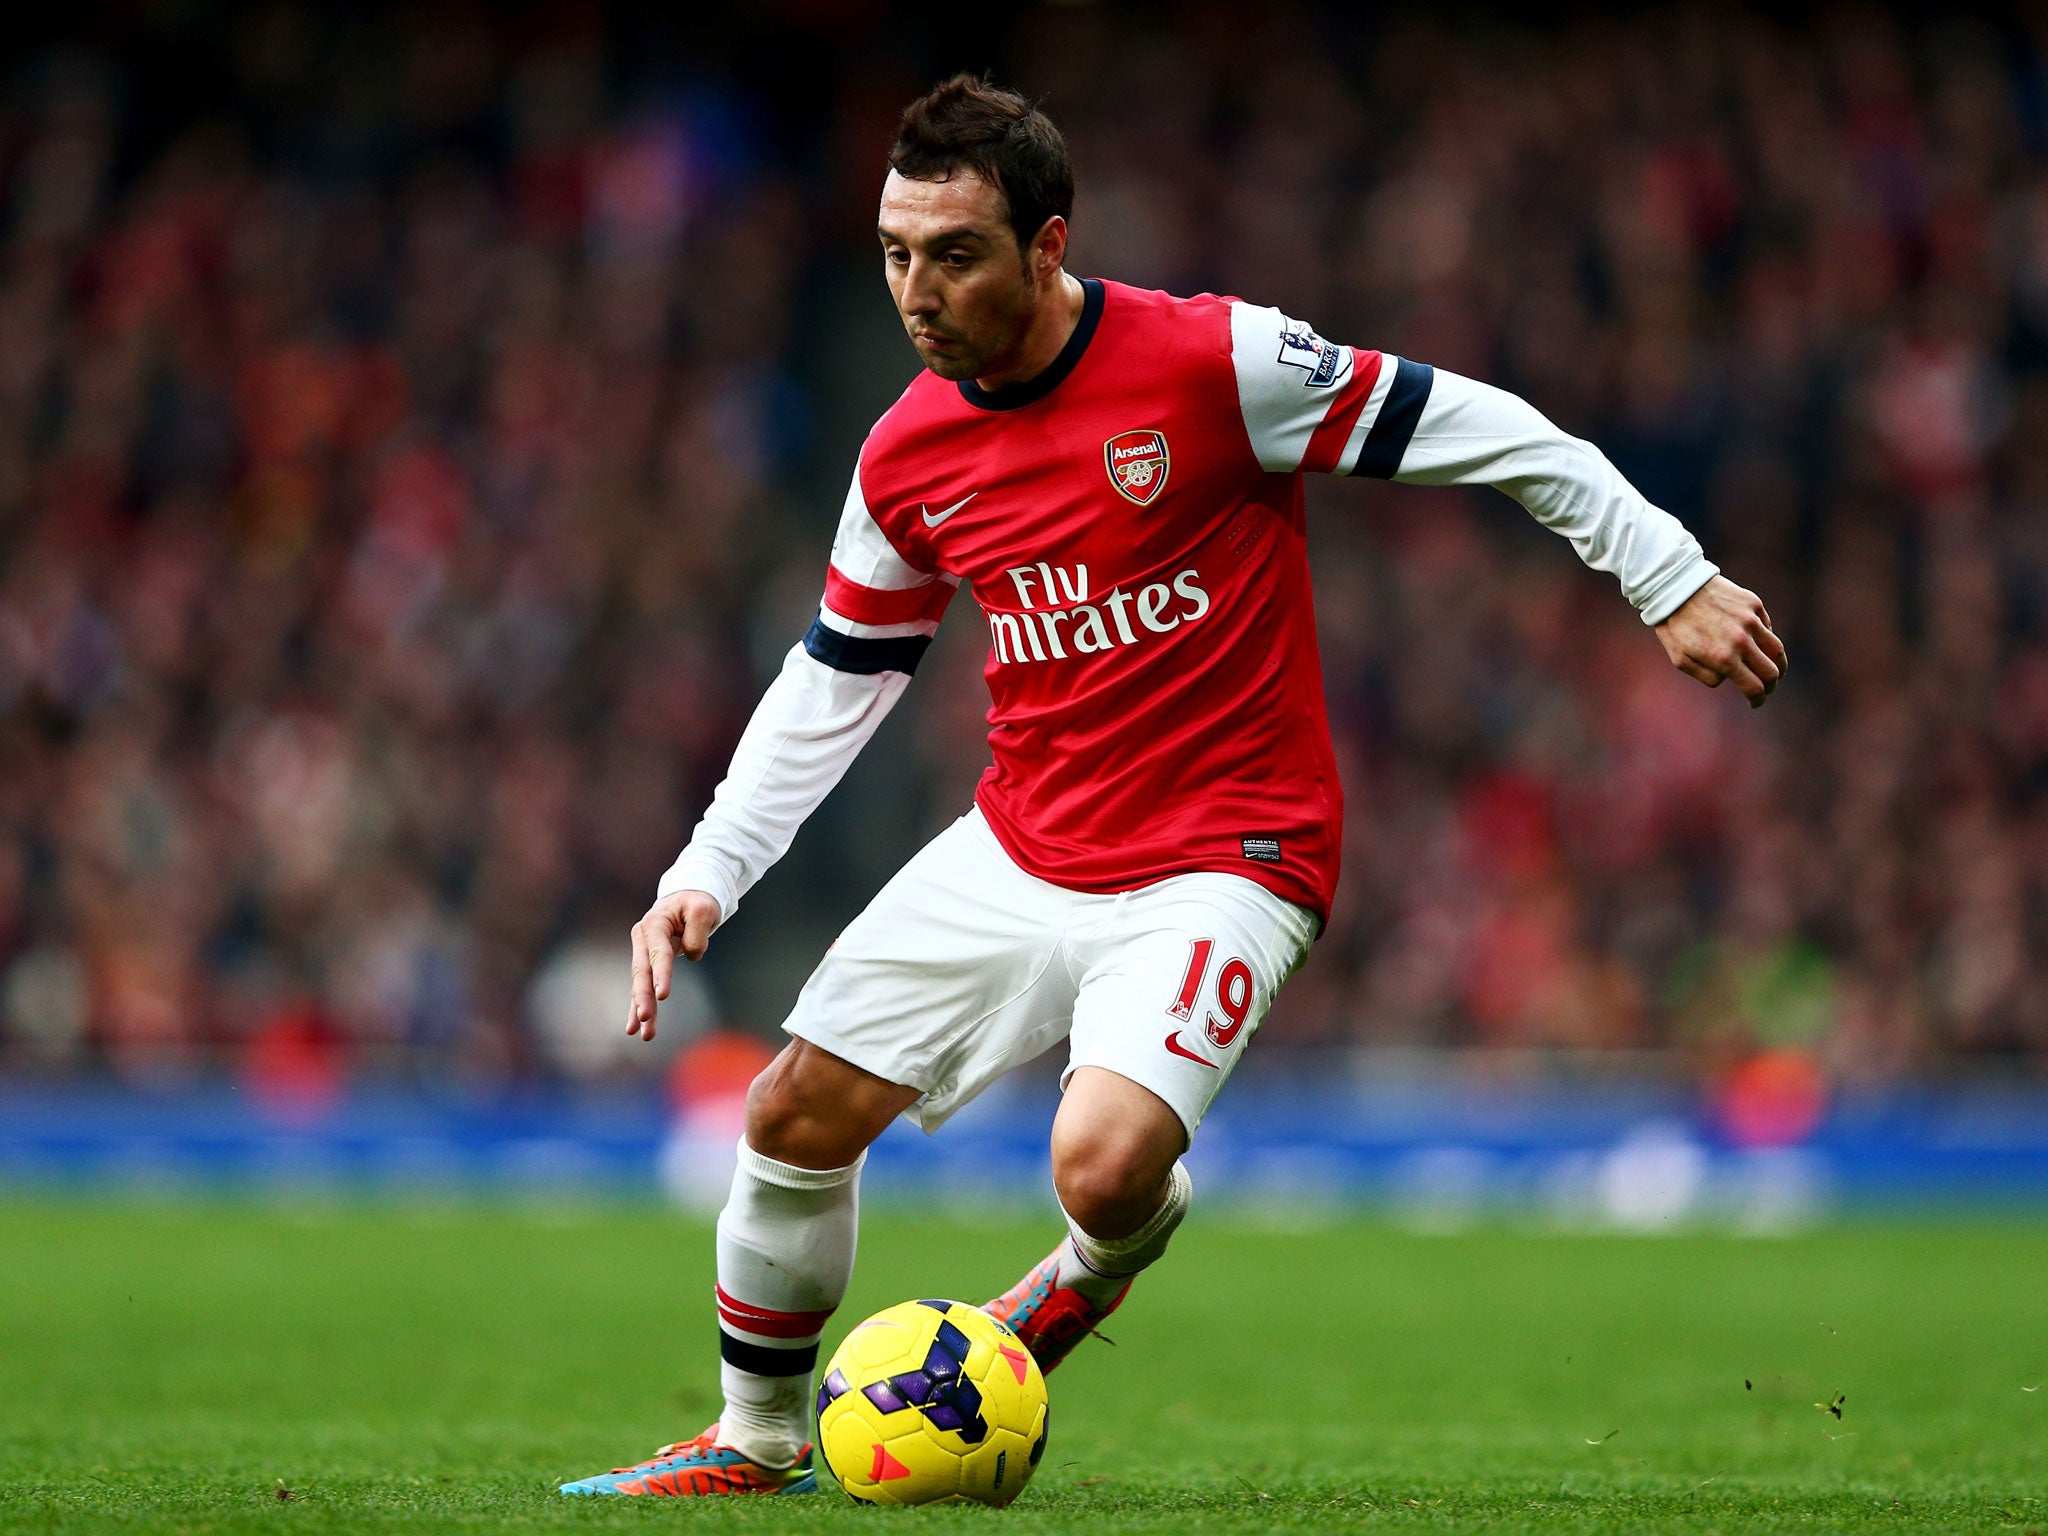 Santi Cazorla believes Arsenal are top of the Premier League table on merit following the 2-0 win over Fulham